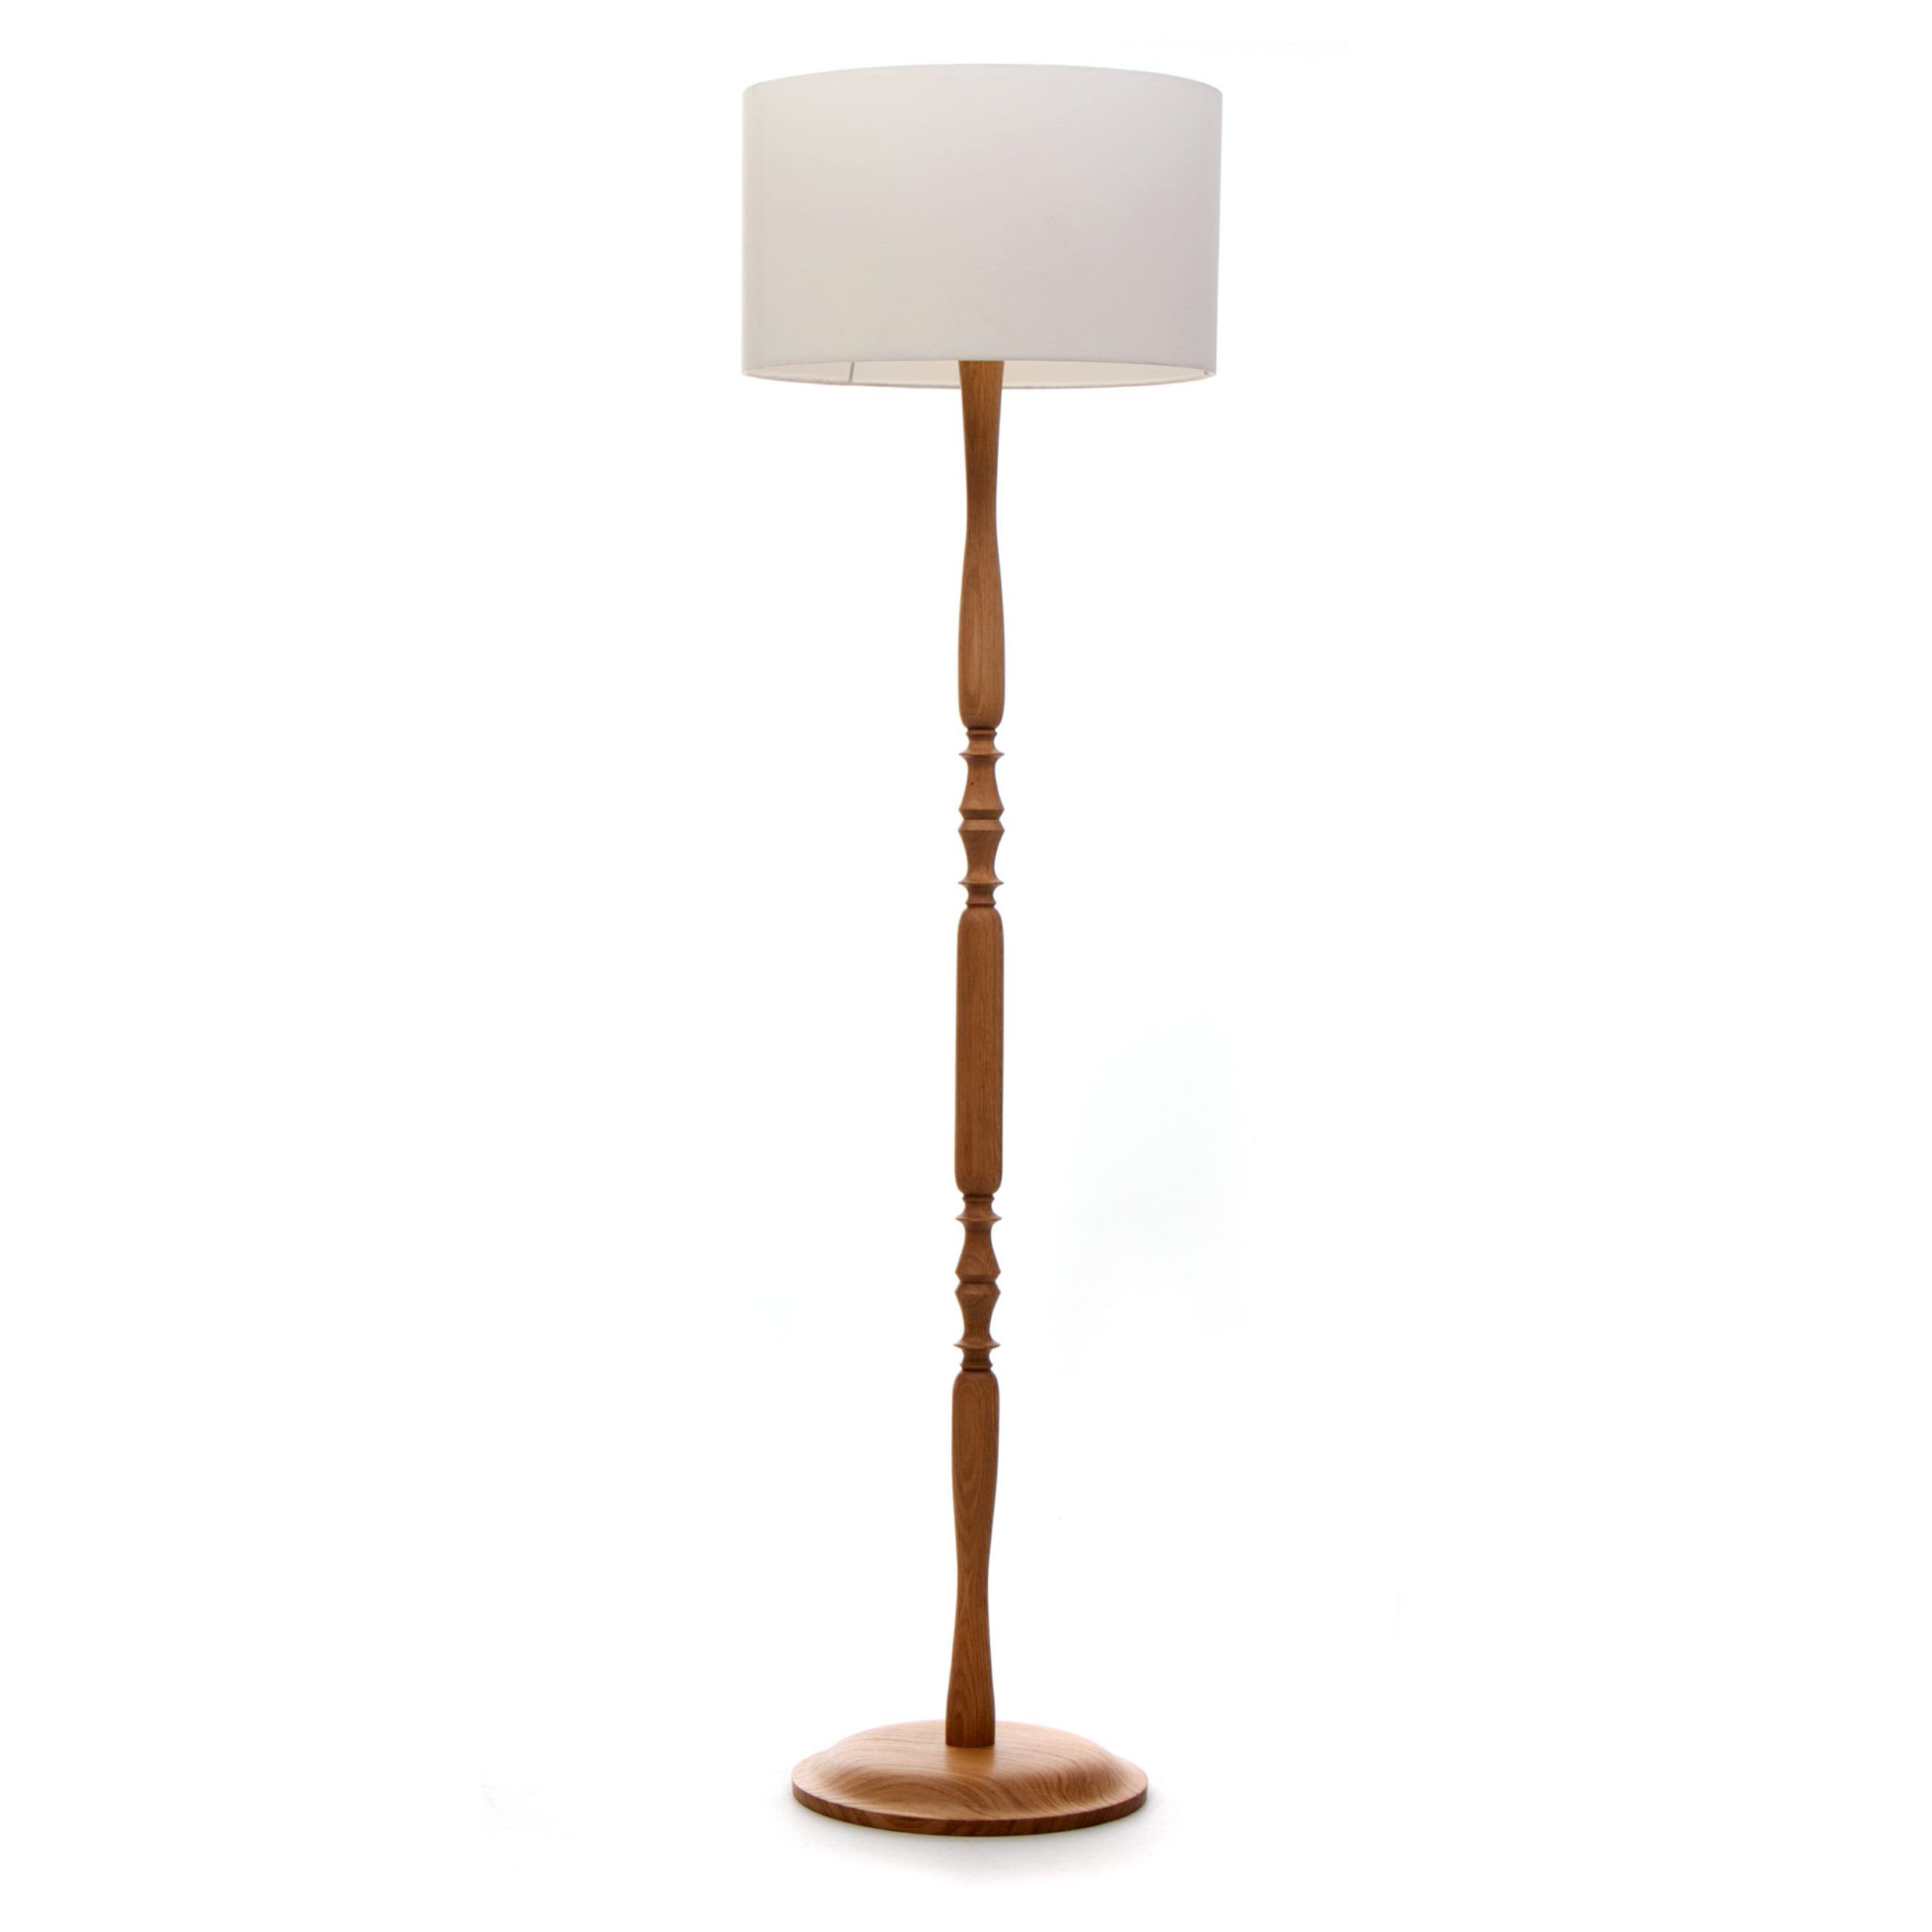 Oak Floor Lamps Intended For Most Current Classic Oak Floor Lamp (View 6 of 15)